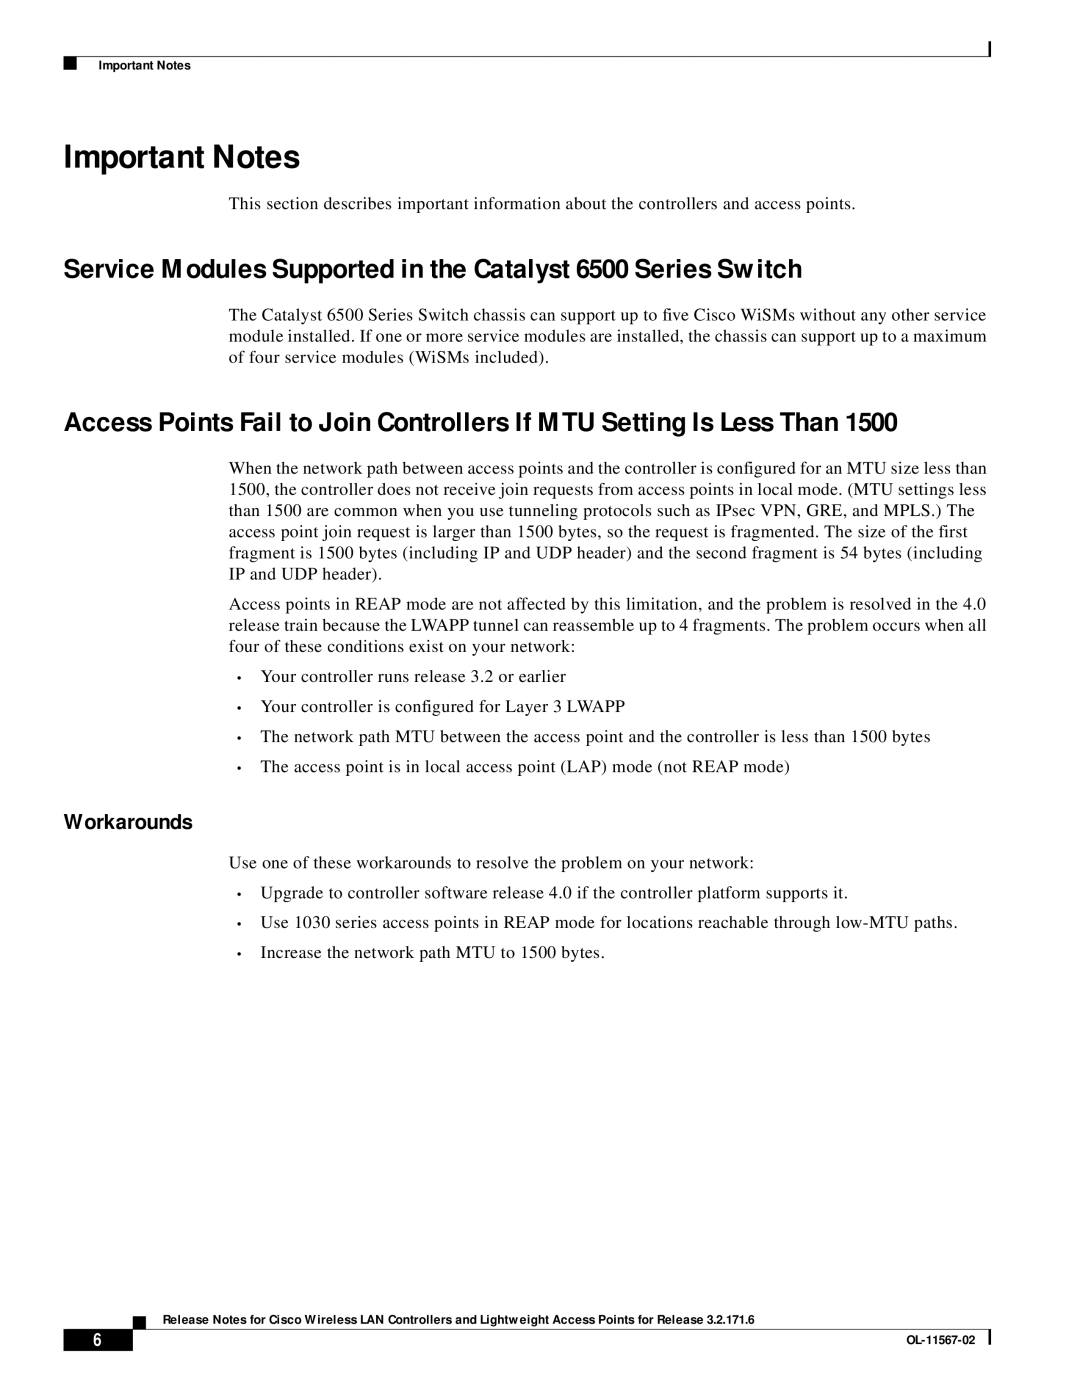 Cisco Systems OL-11567-02 manual Important Notes, Service Modules Supported in the Catalyst 6500 Series Switch, Workarounds 